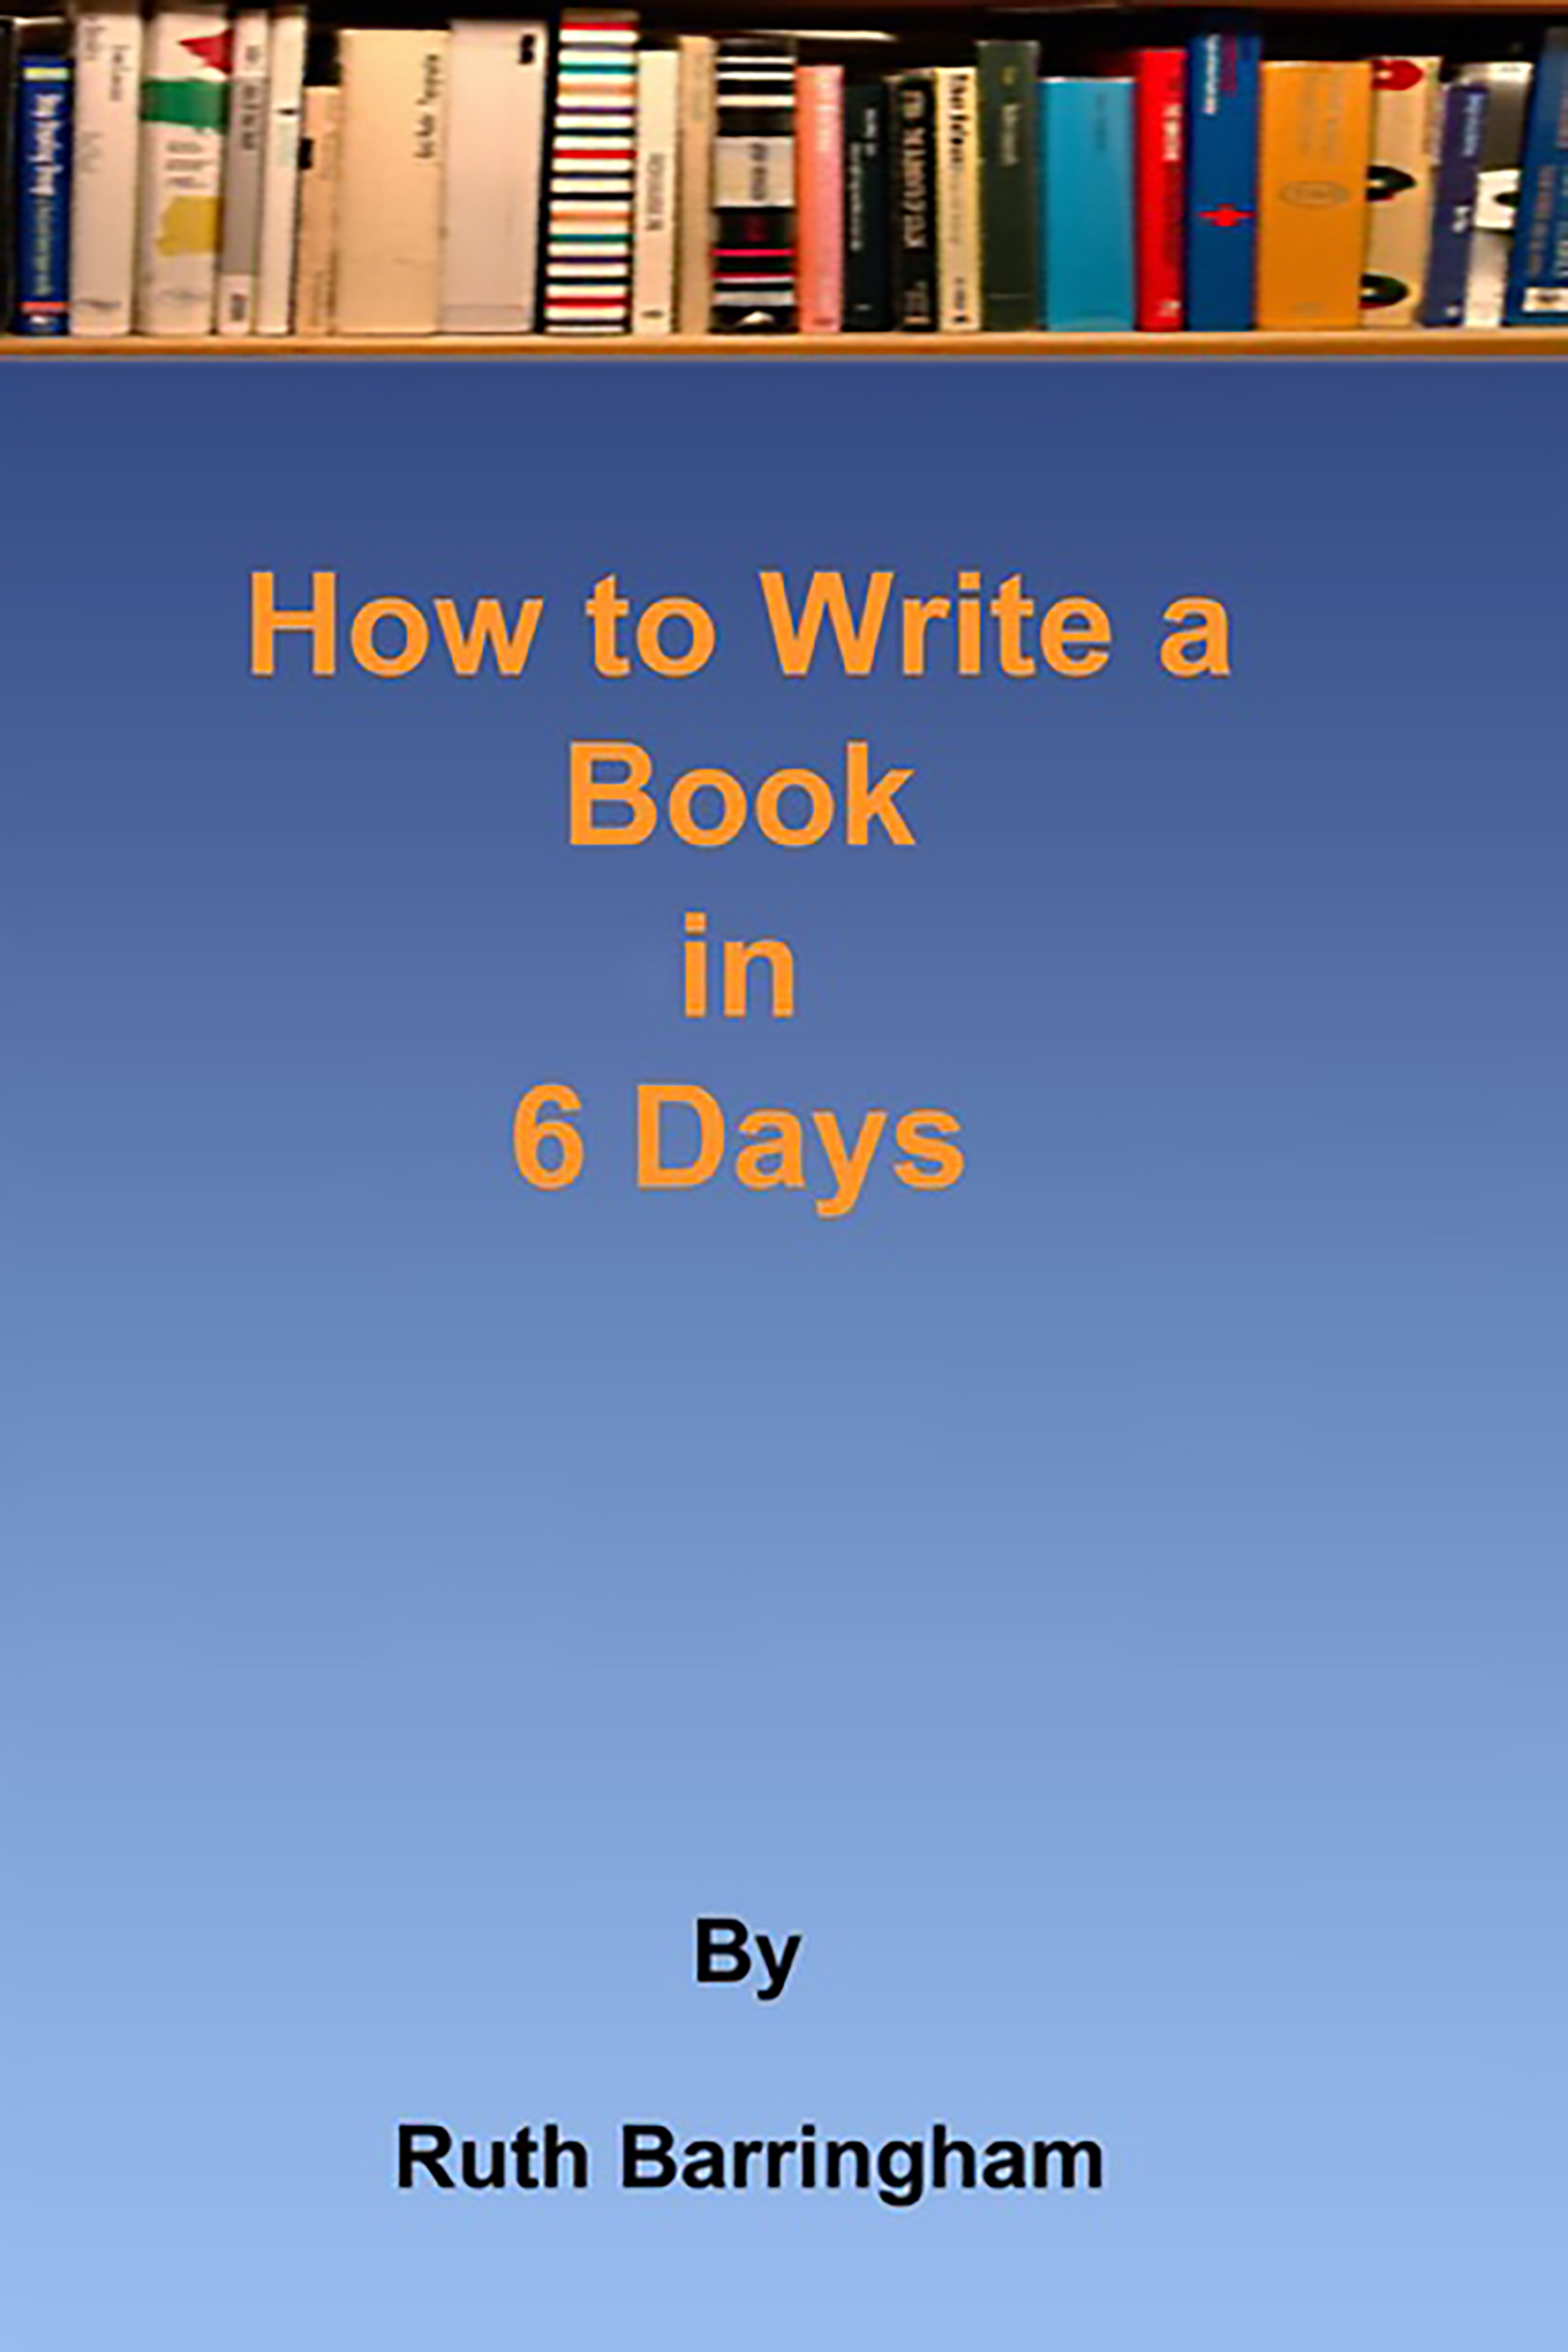 How to Write a Book in 6 Days - by Ruth Barringham